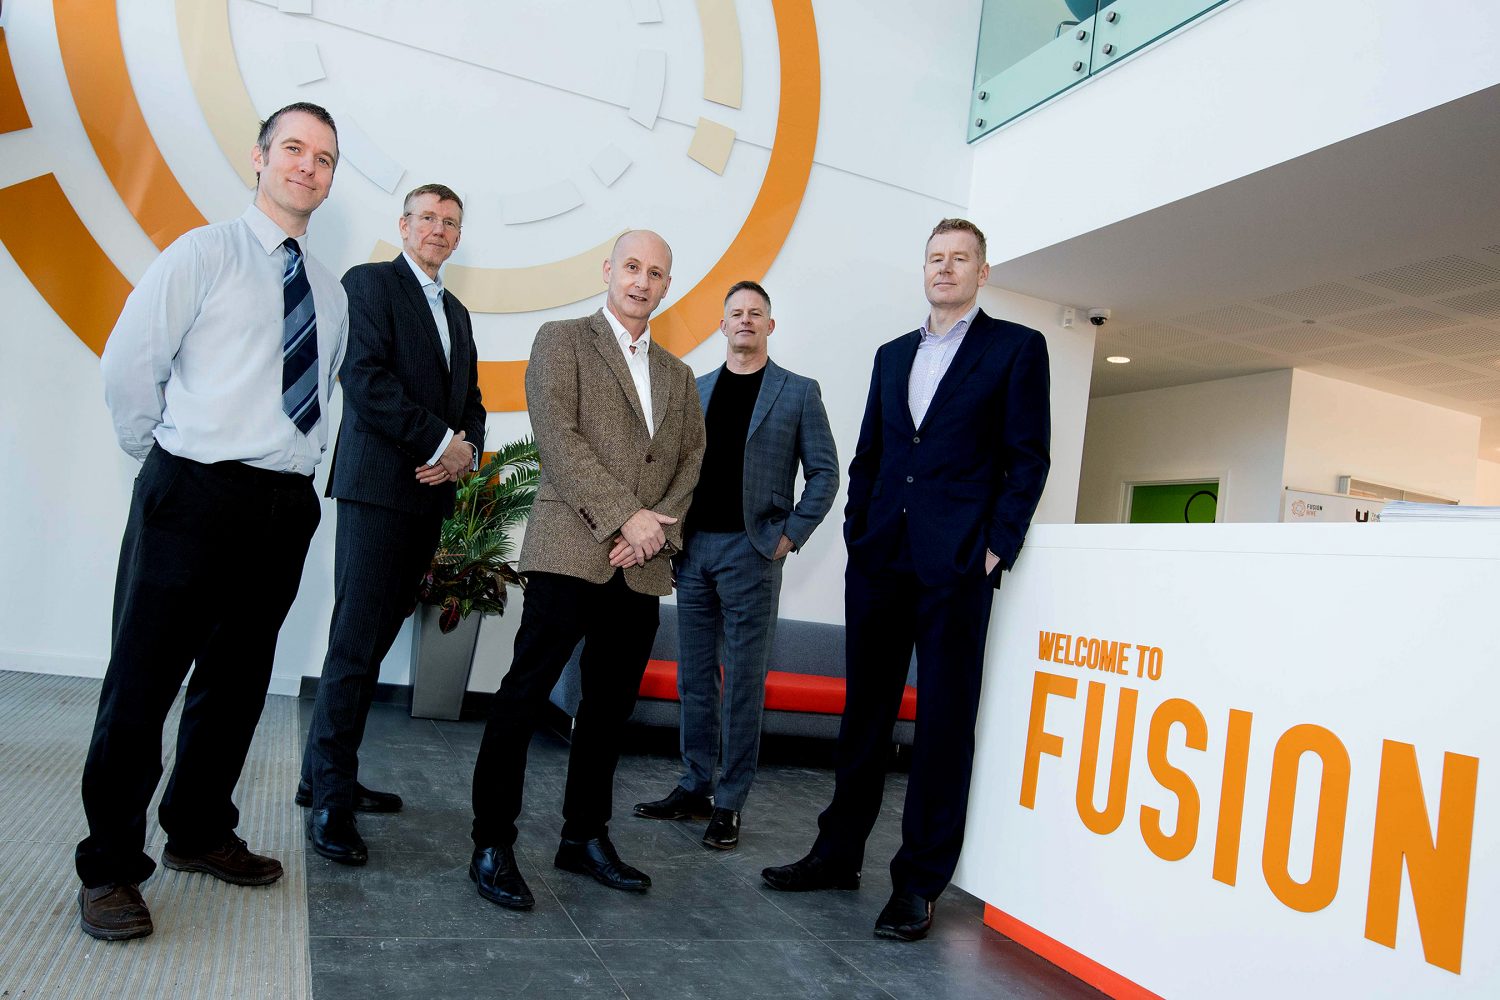 Five men standing, man to far right wearing a black suit is standing against a reception desk with Welcome to Fusion signage on it.